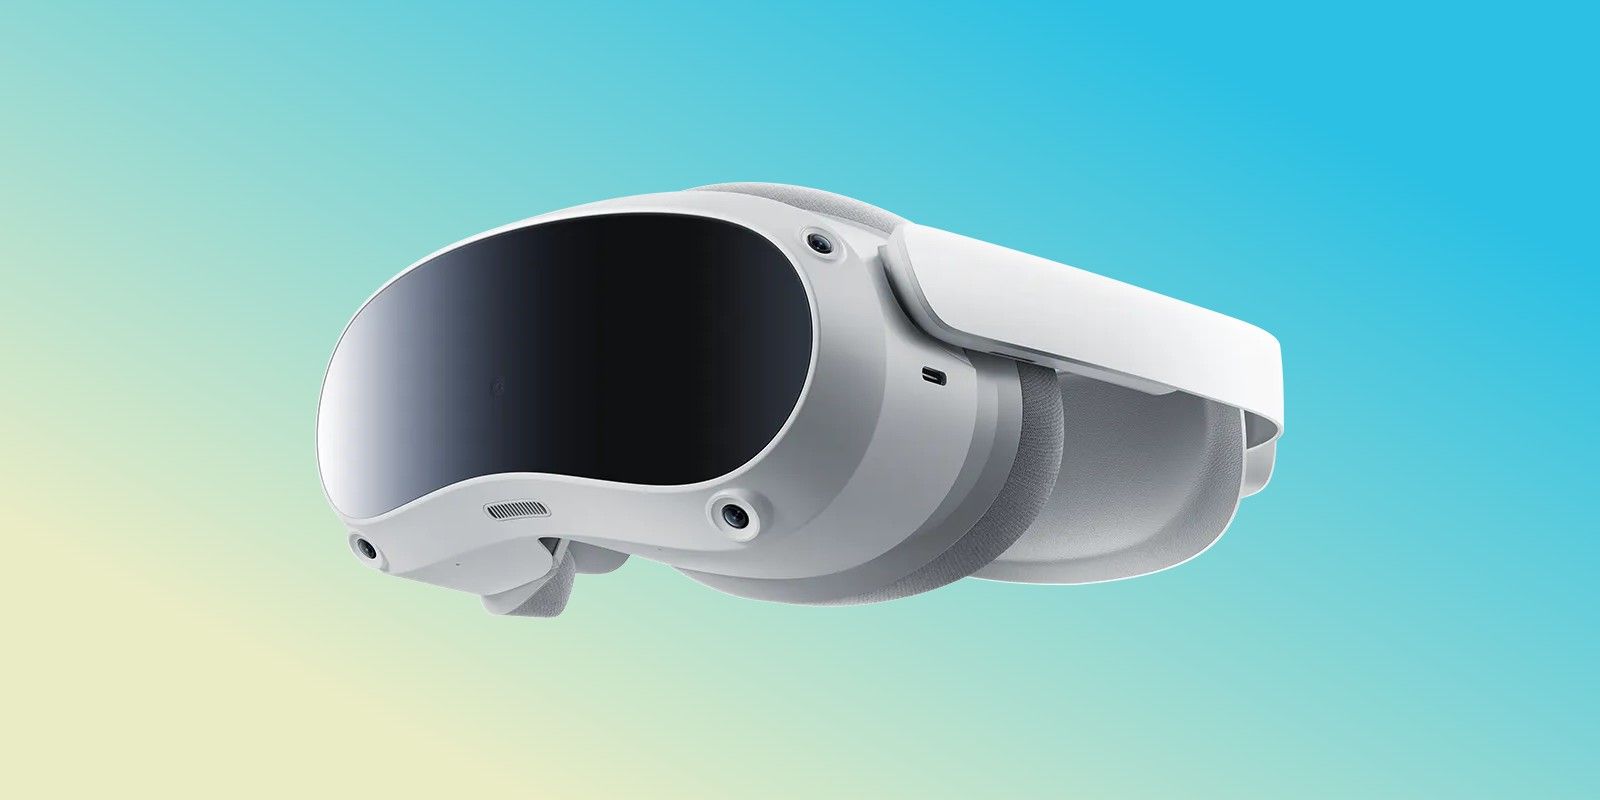 A photo of an VR Headset against a gradient background